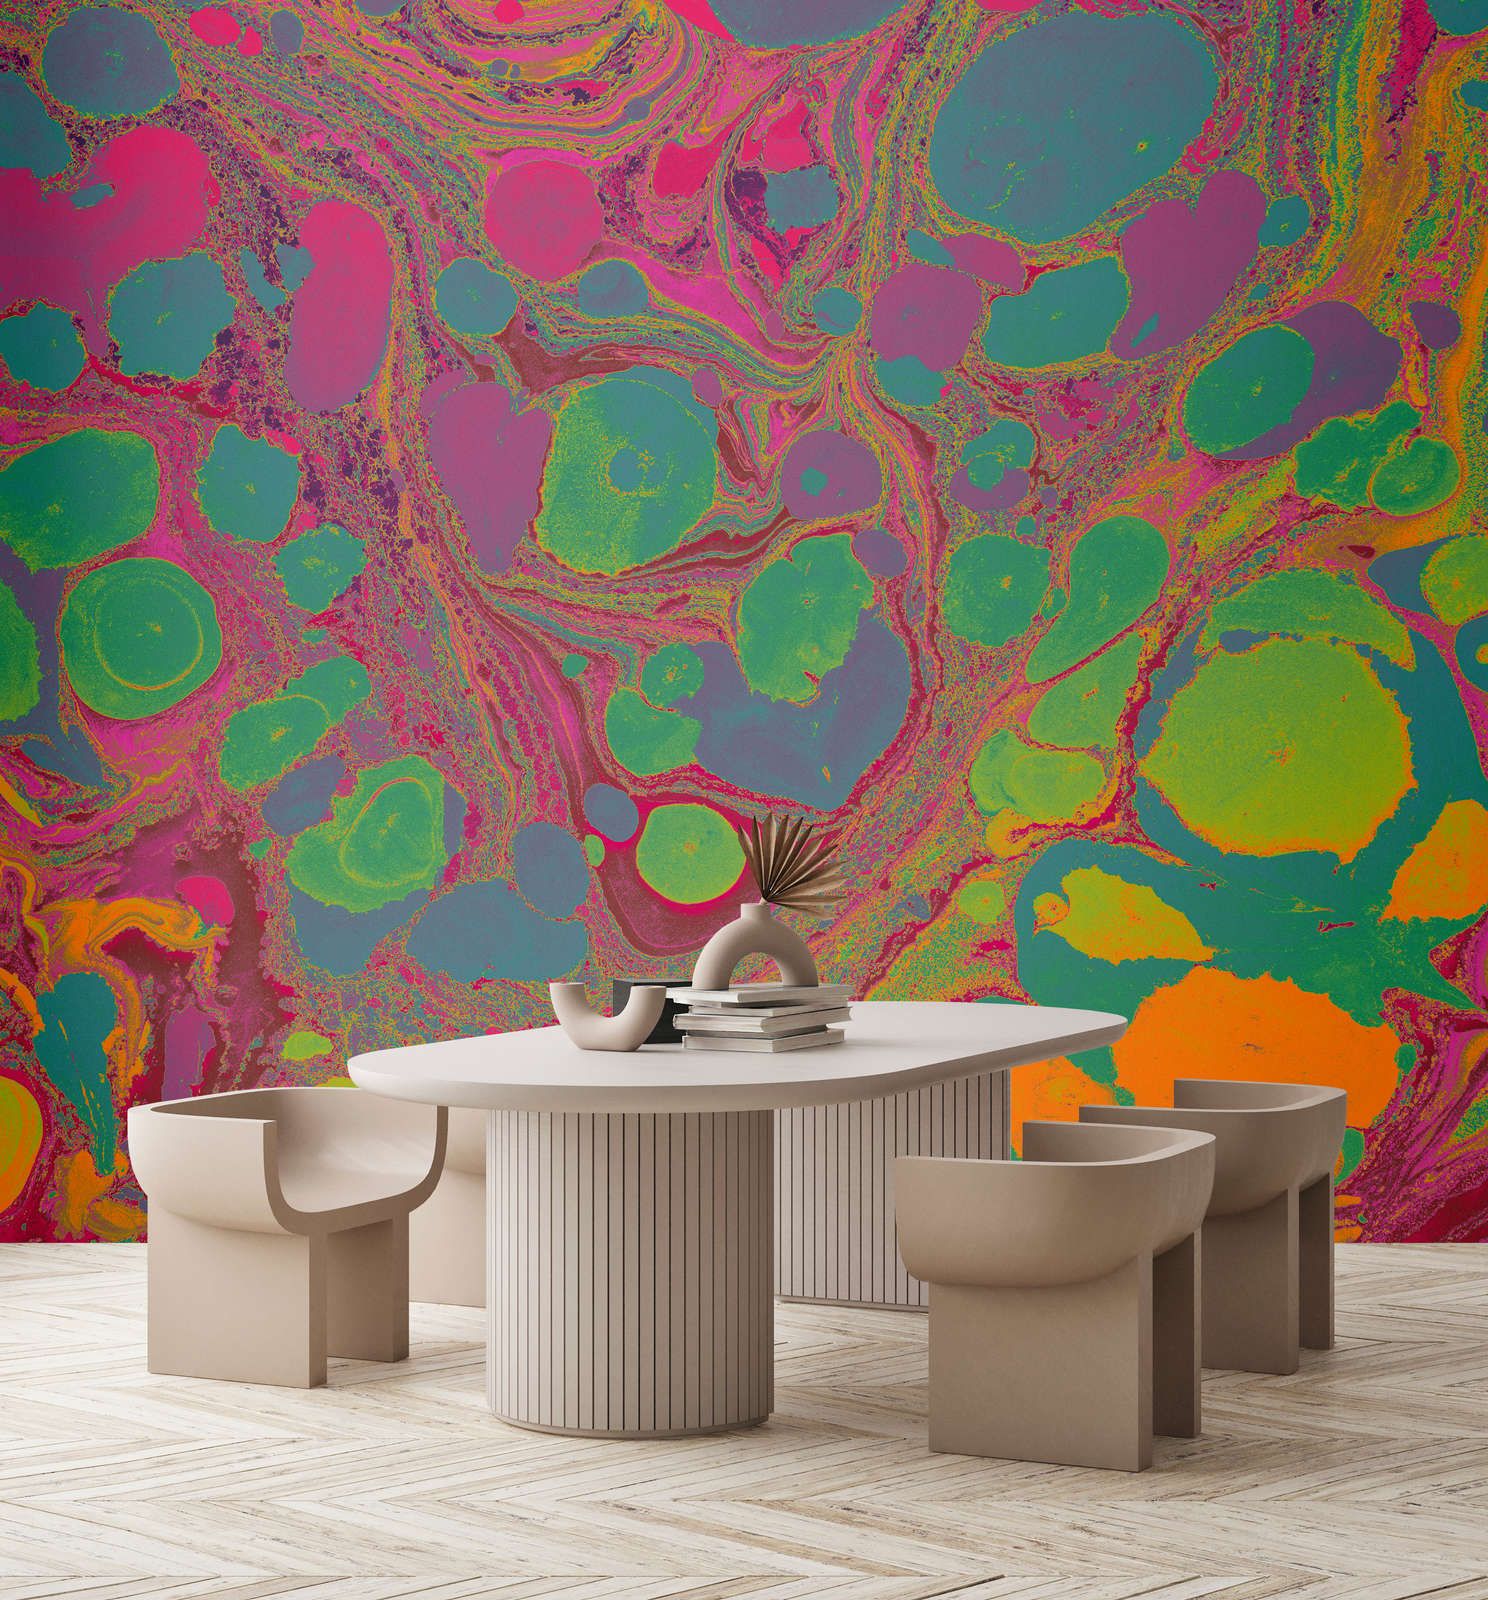             Photo wallpaper »flow« - Colour splash in bright colours - green, pink, orange | Smooth, slightly pearlescent non-woven fabric
        